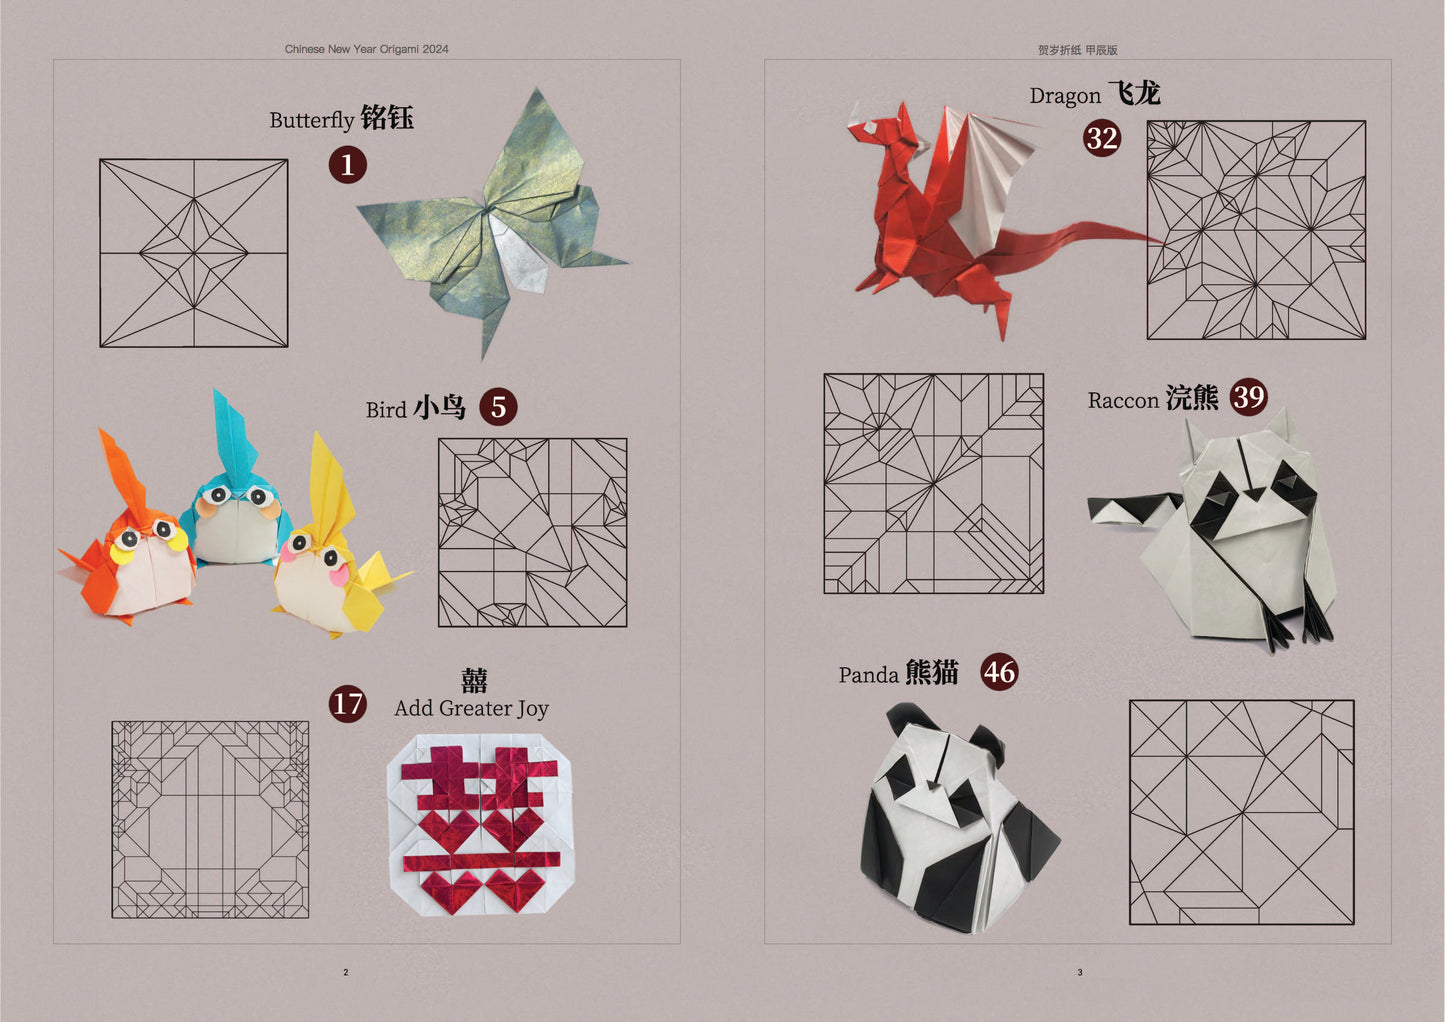 New book Chinese New Year Origami 2024 [hardcover printed book]